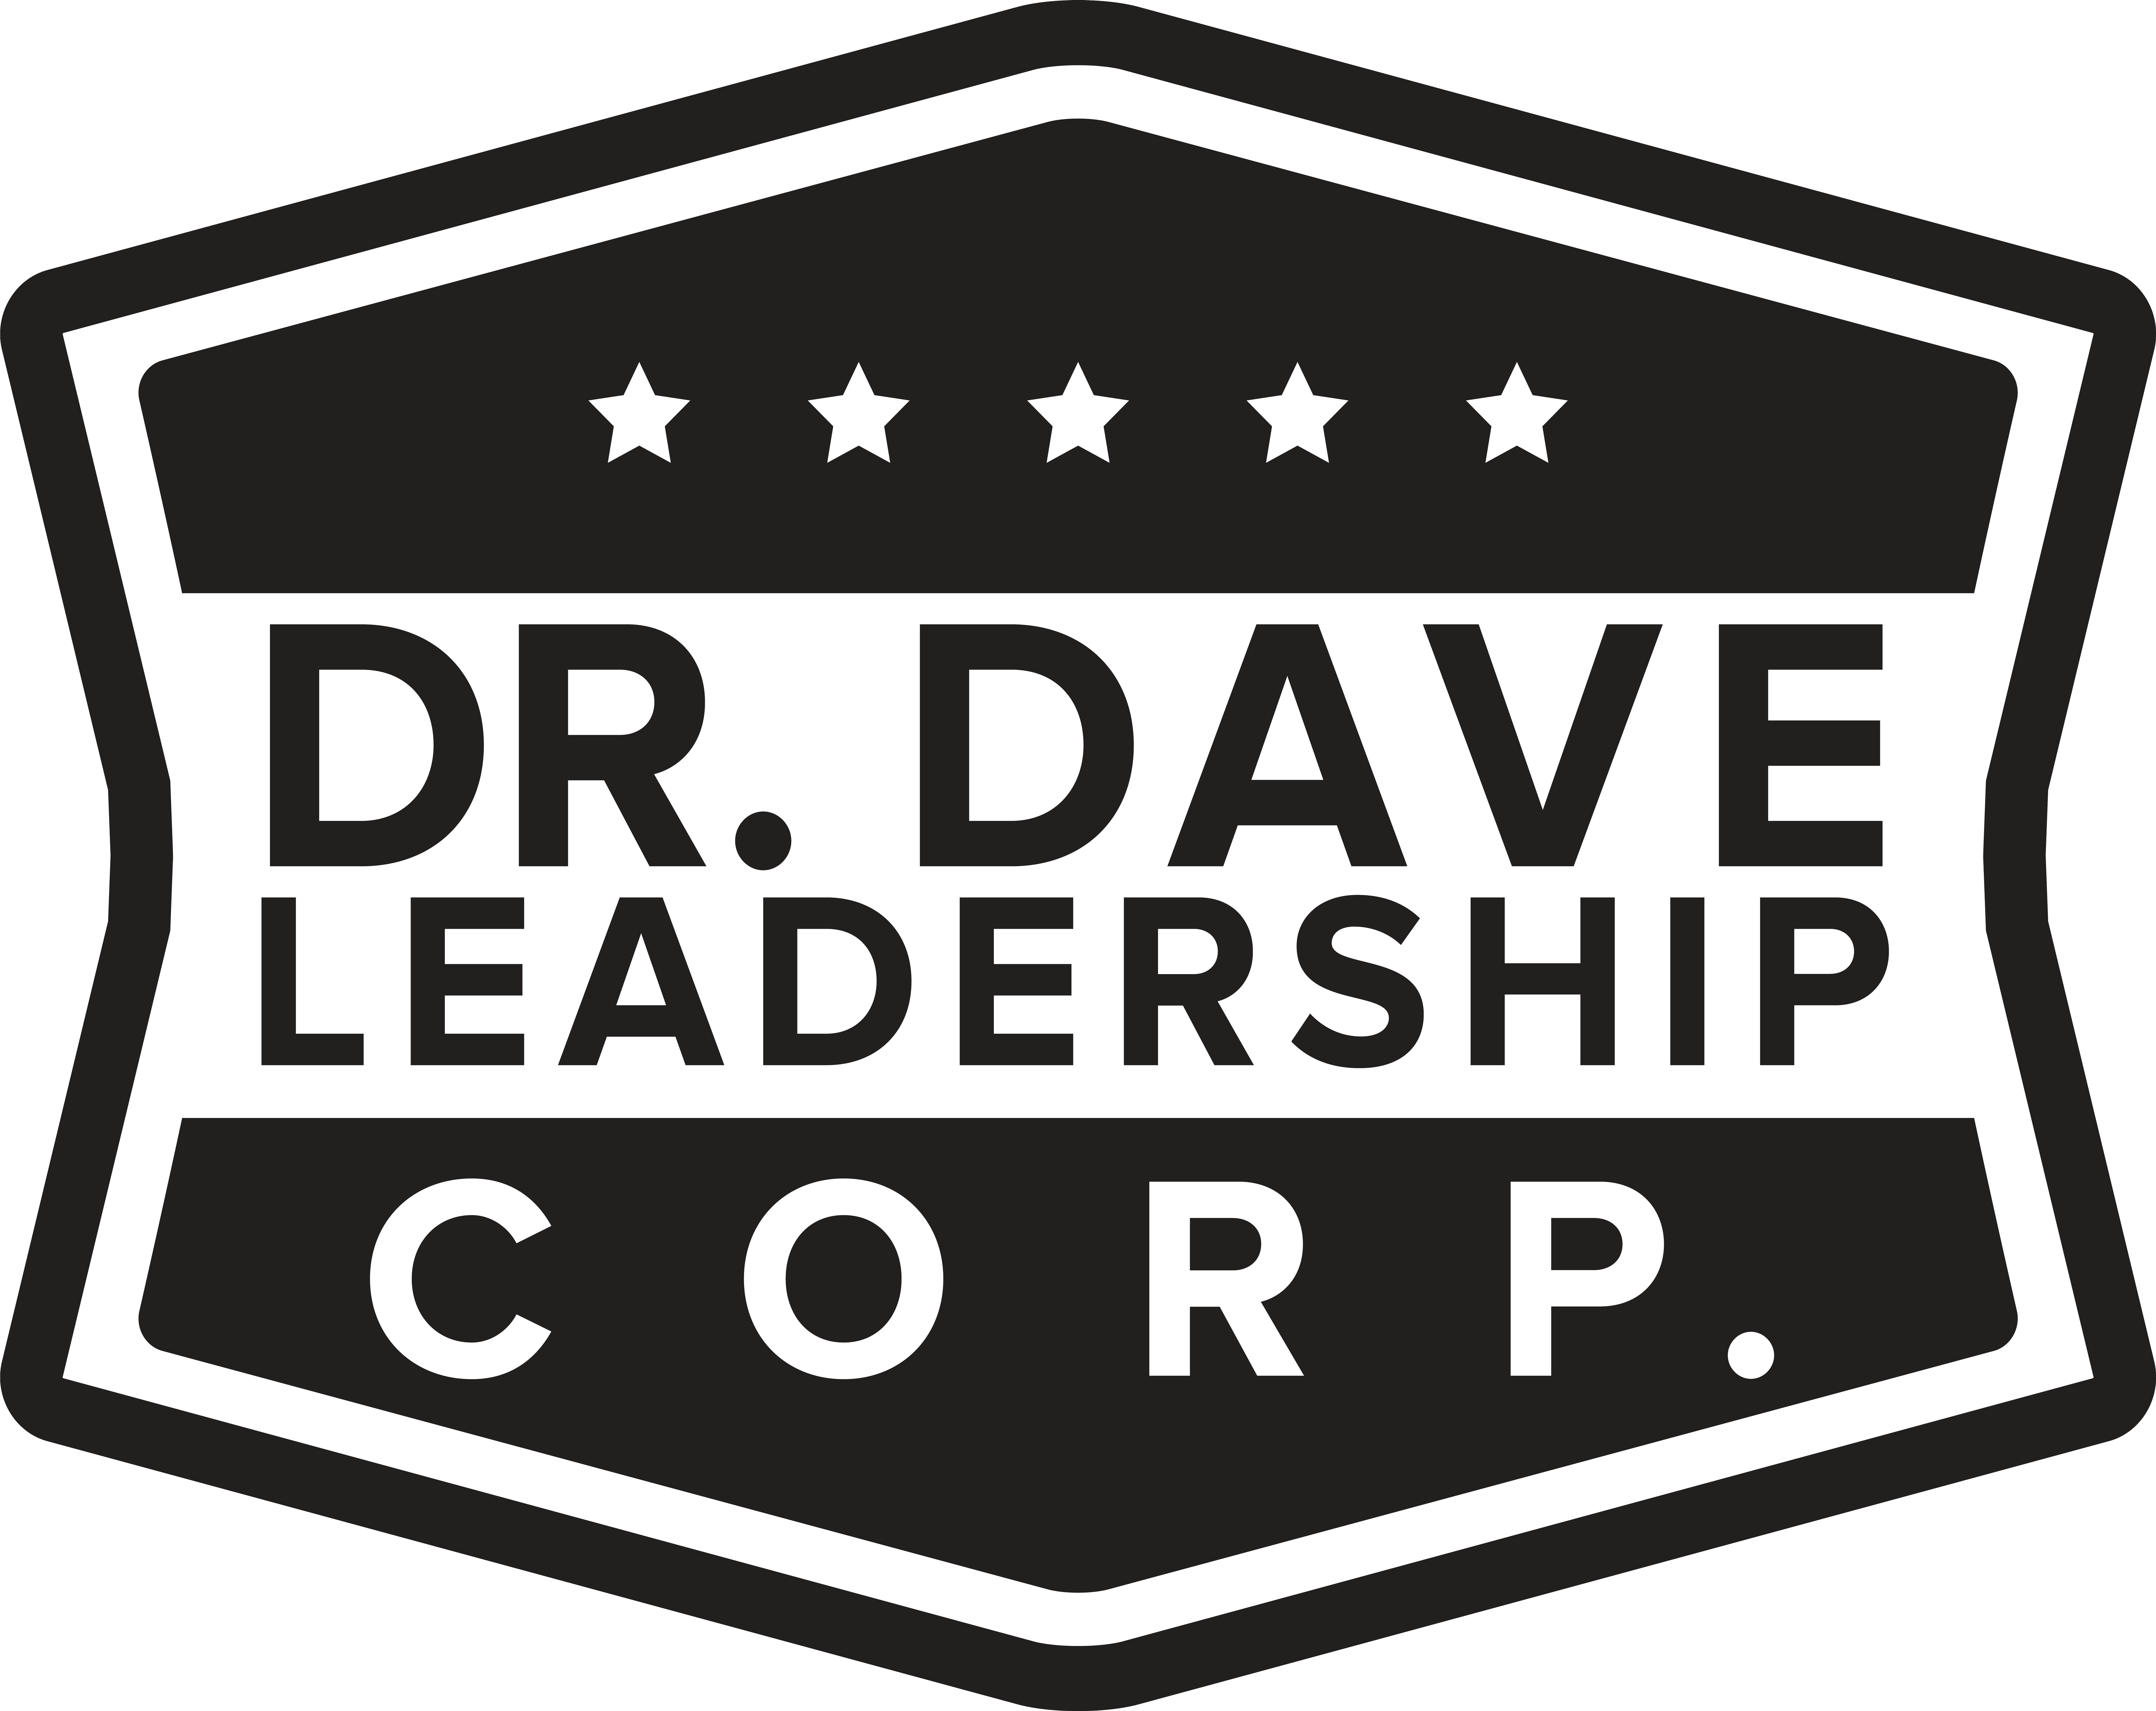 Dr. Dave Leadership Corp.